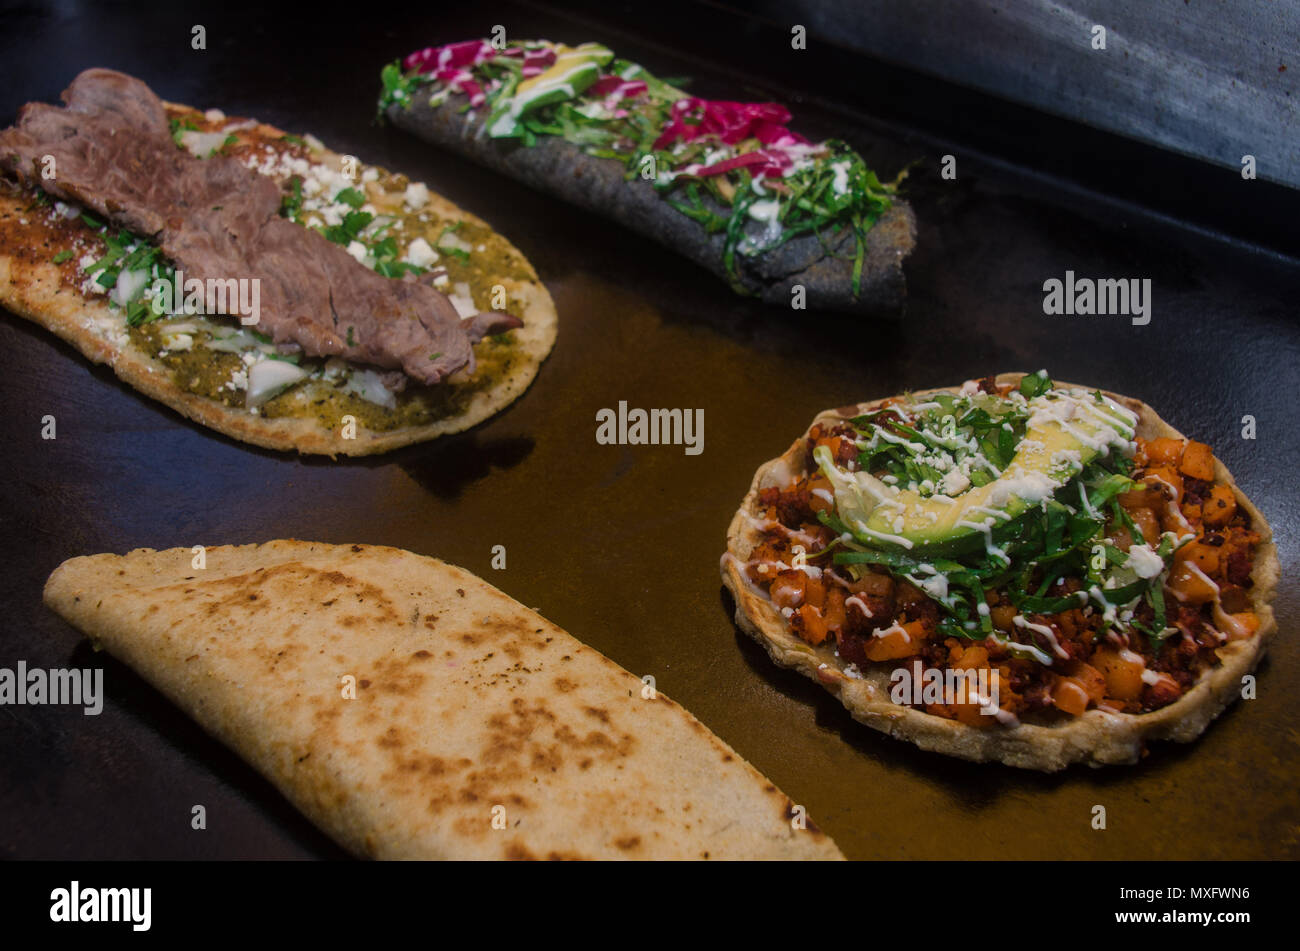 https://c8.alamy.com/comp/MXFWN6/typical-mexican-antojitos-in-the-cooking-process-MXFWN6.jpg